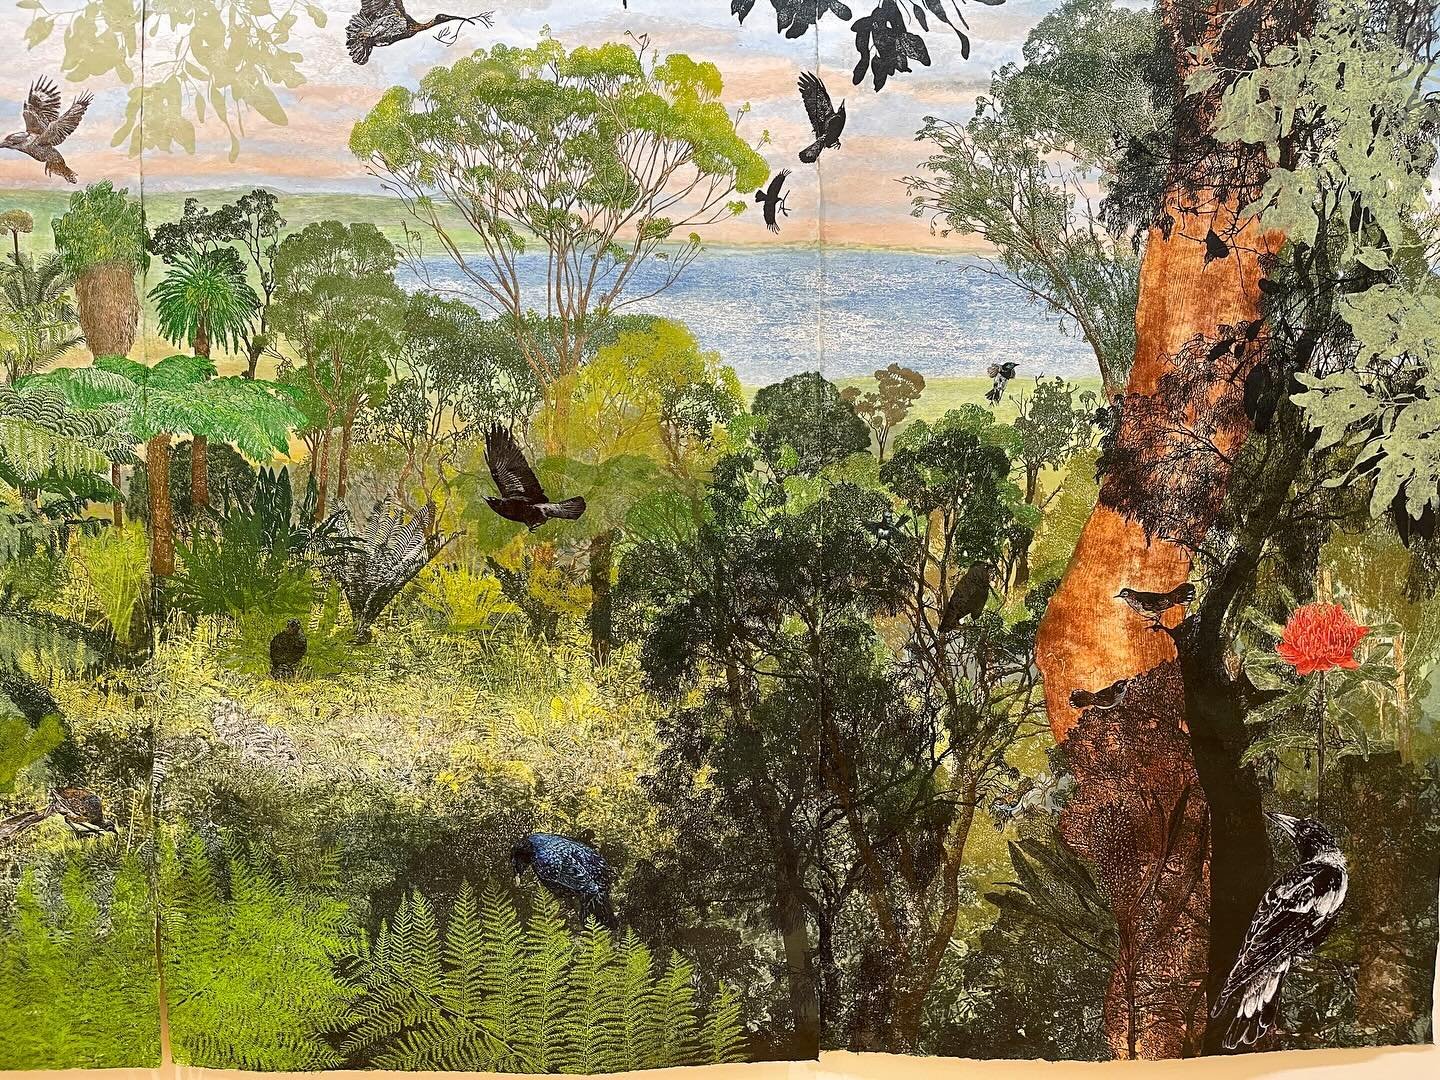 Yesterday we visited the Australian Galleries in Paddington, Sydney. Such a great spot, 6 galleries tucked into a quaint neighborhood. Dianne Fogwells linocut and pigmented ink prints blew me away! She also created a cookbook talking about her proces